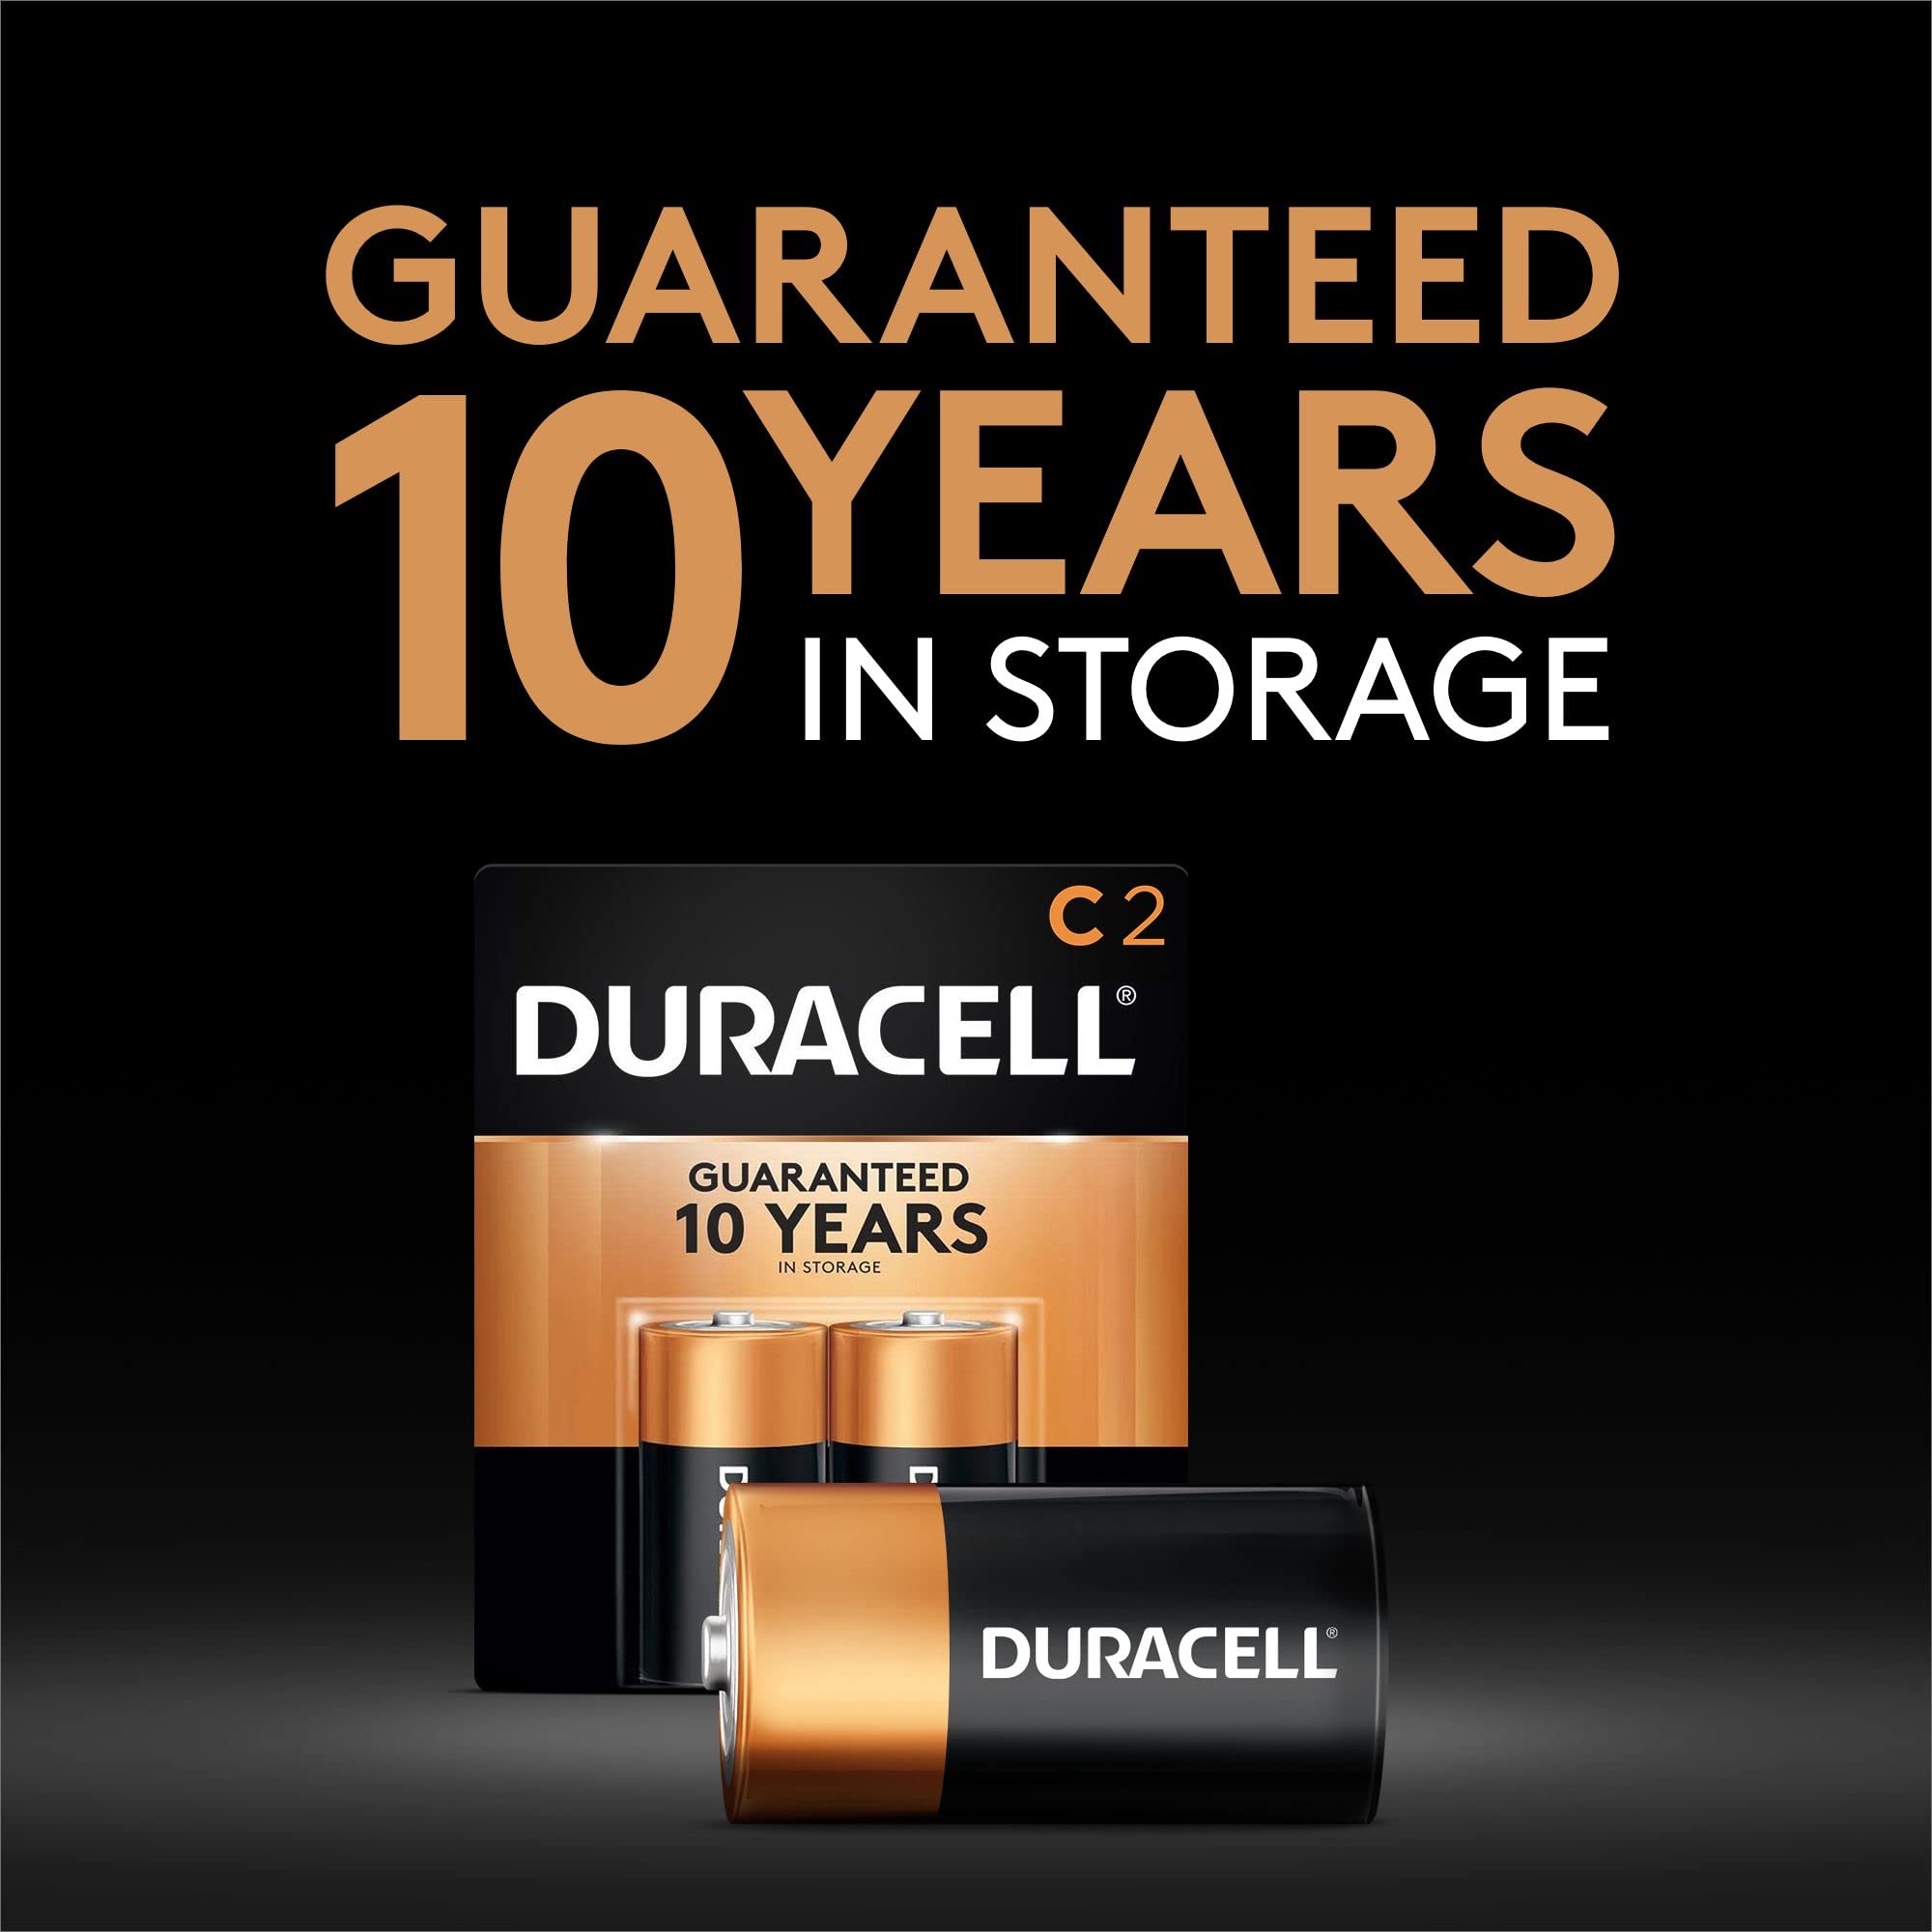 DURACELL Coppertop 1.5V Size C Alkaline Battery, (Pack of 12) - image 3 of 5